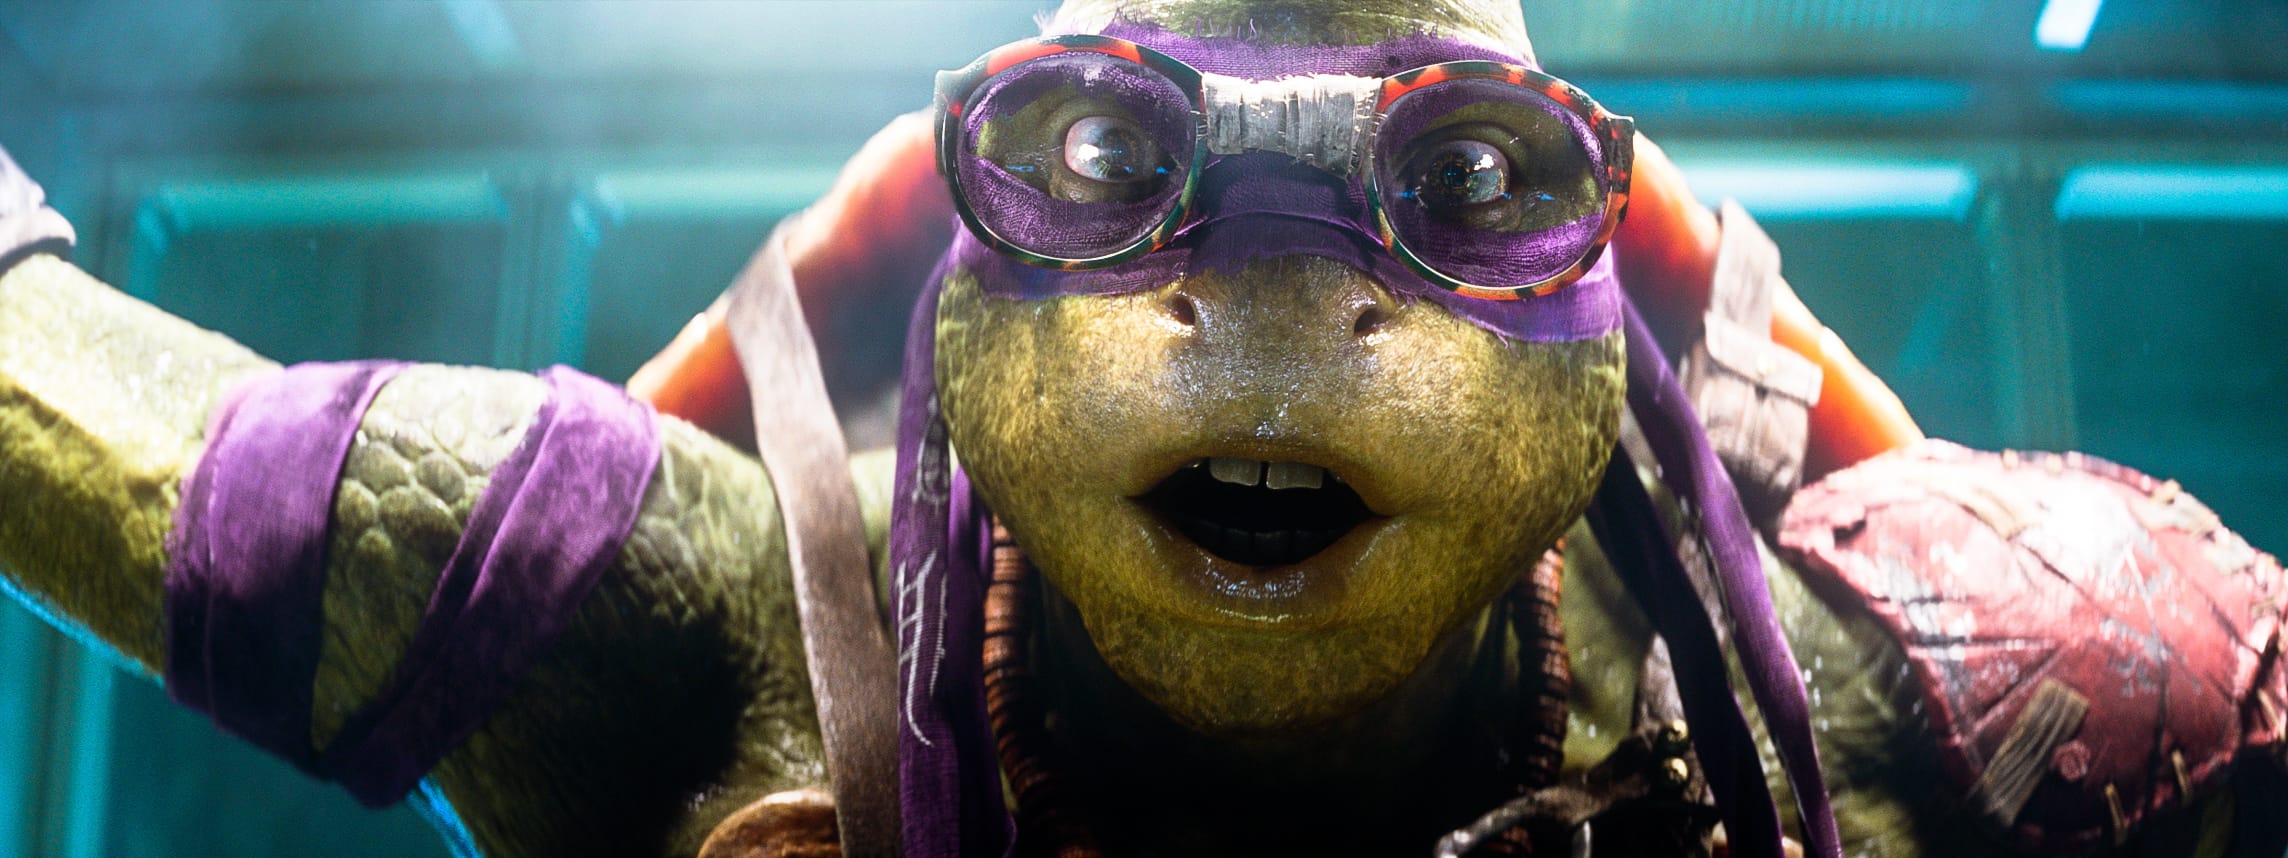 Some of the most popular costumes for Halloween this year are expected to be based on the reptilian superheroes after the 2014 release of the film "Teenage Mutant Ninja Turtles." (Paramount Pictures, Industrial Light & Magic via AP, File)